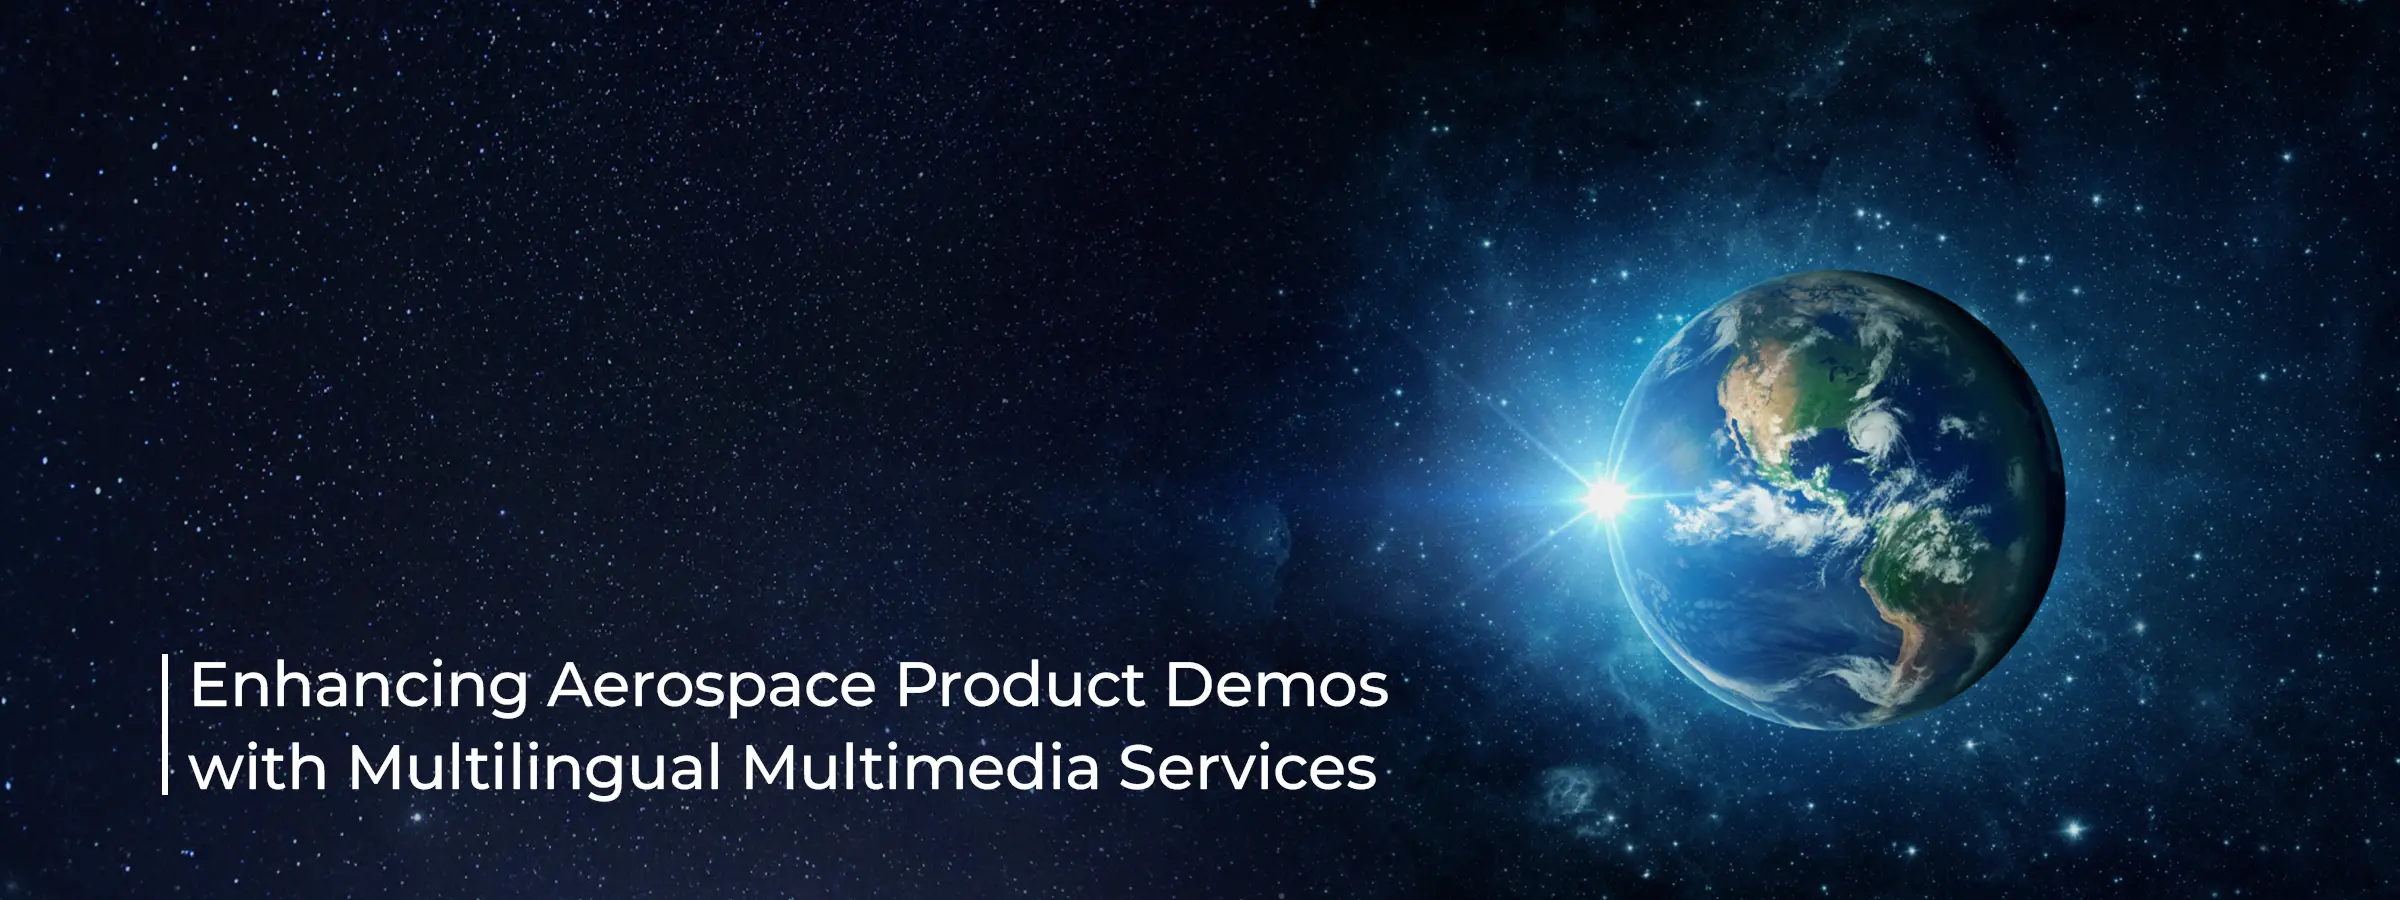 aerospace-and-defense-product-management-industry-blog-banner